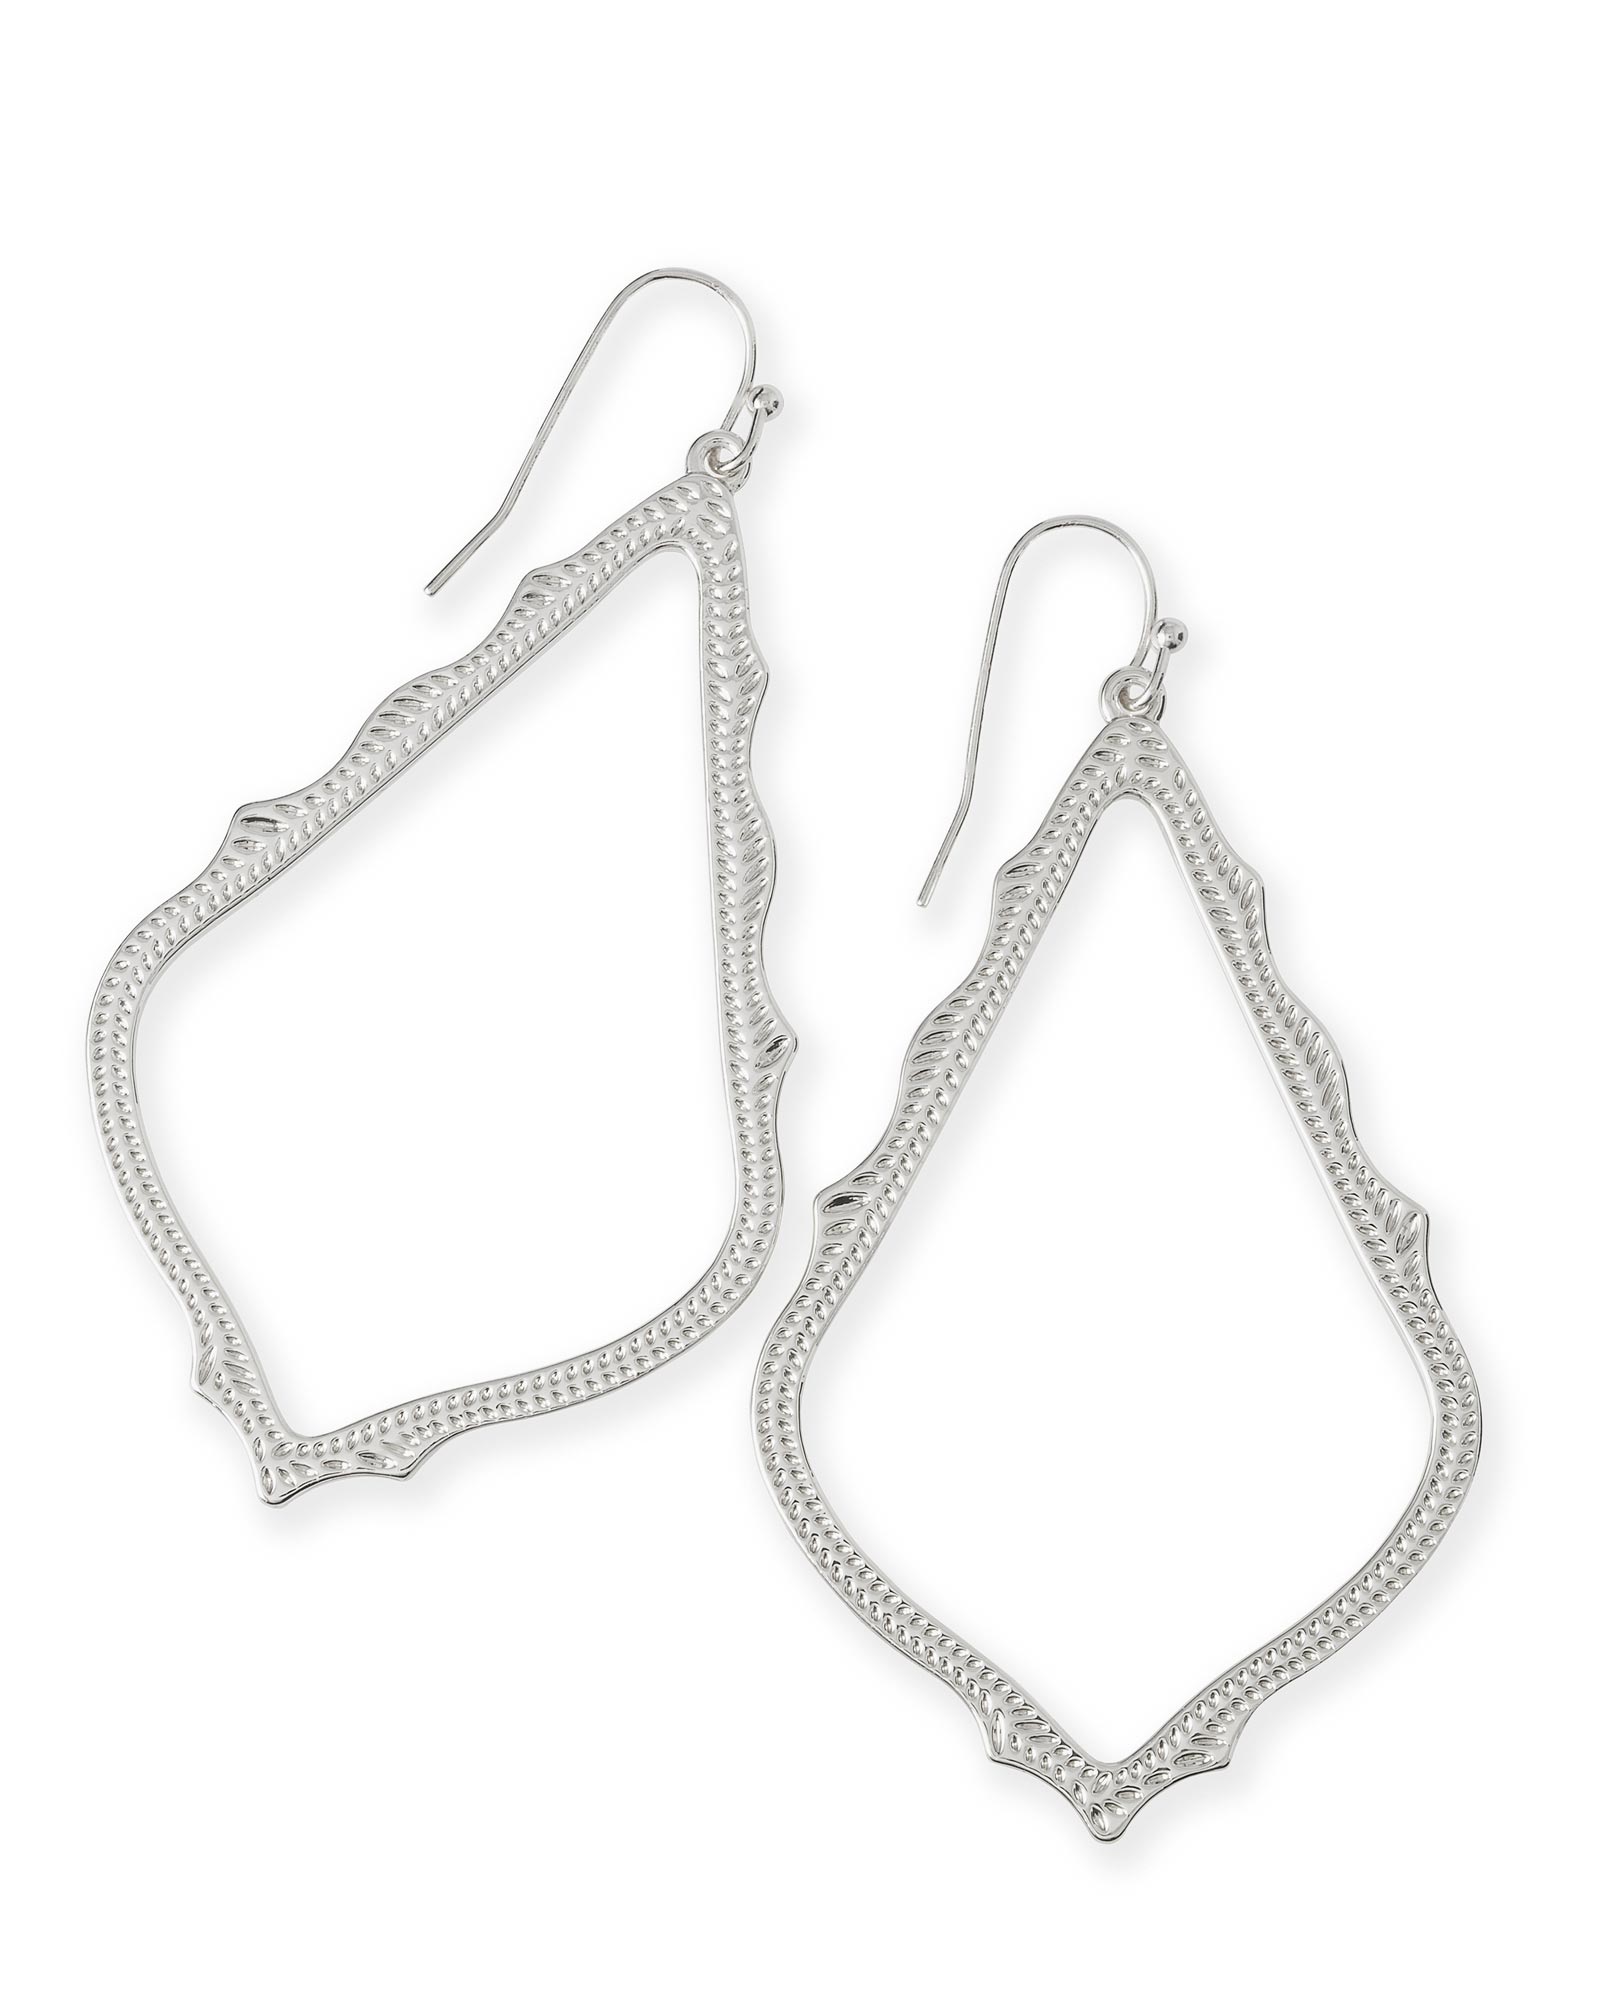 KENDRA SCOTT SOPHEE COLLECTION RHODIUM PLATED BRASS FASHION EARRINGS